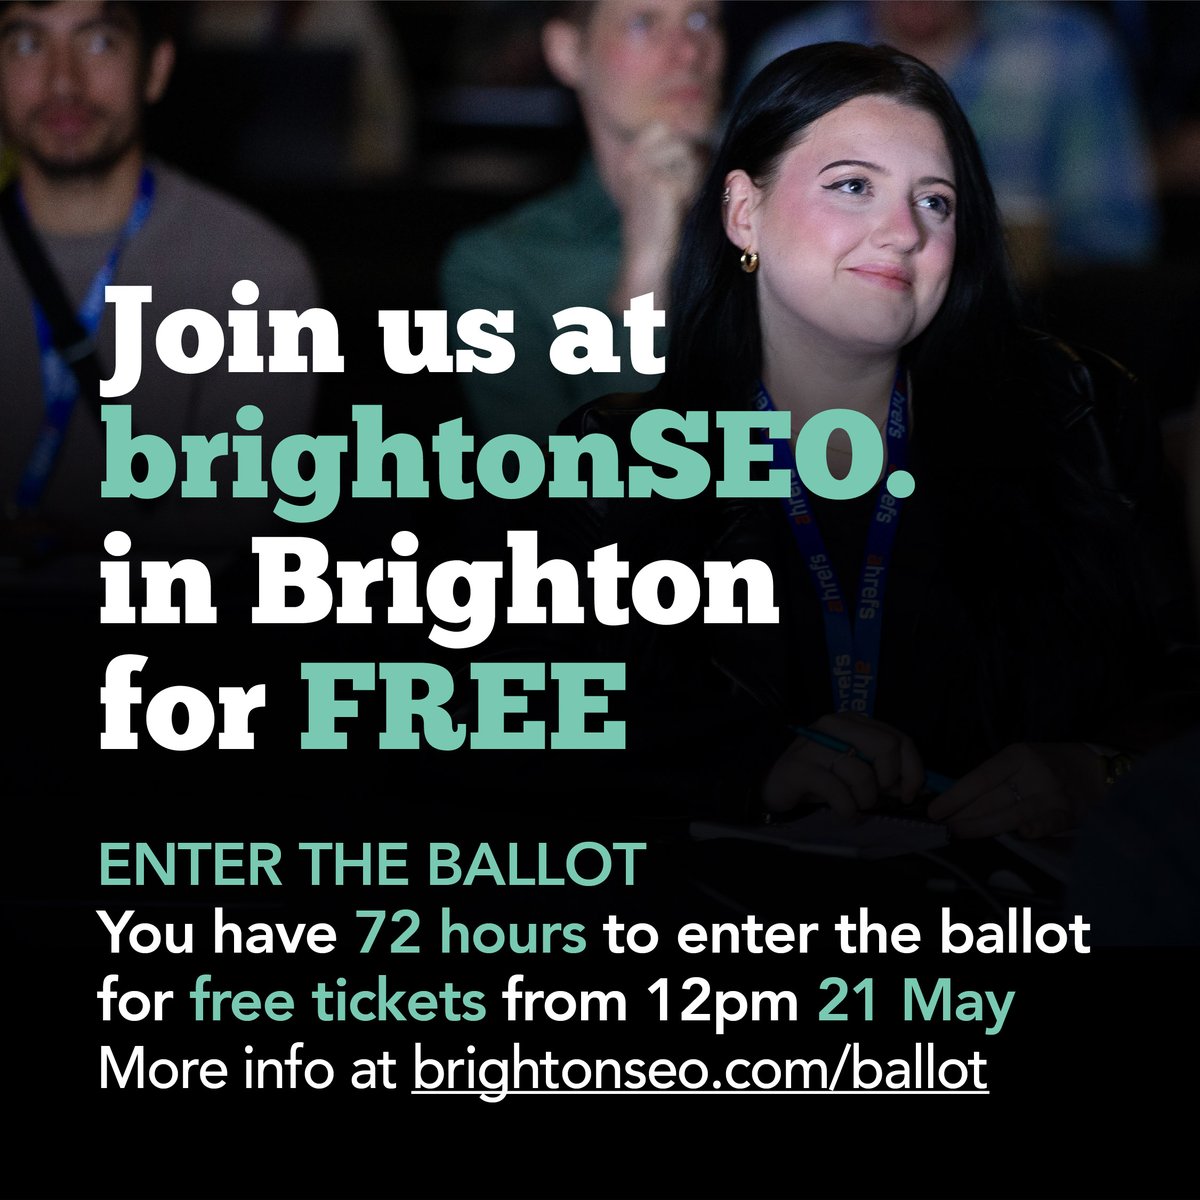 We give away thousands of free single-day tickets to #brightonSEO every year. If you want to win one for the next event in October, all you have to do is enter the ballot, which opens in two weeks. Save the date! addevent.com/event/hR213590…